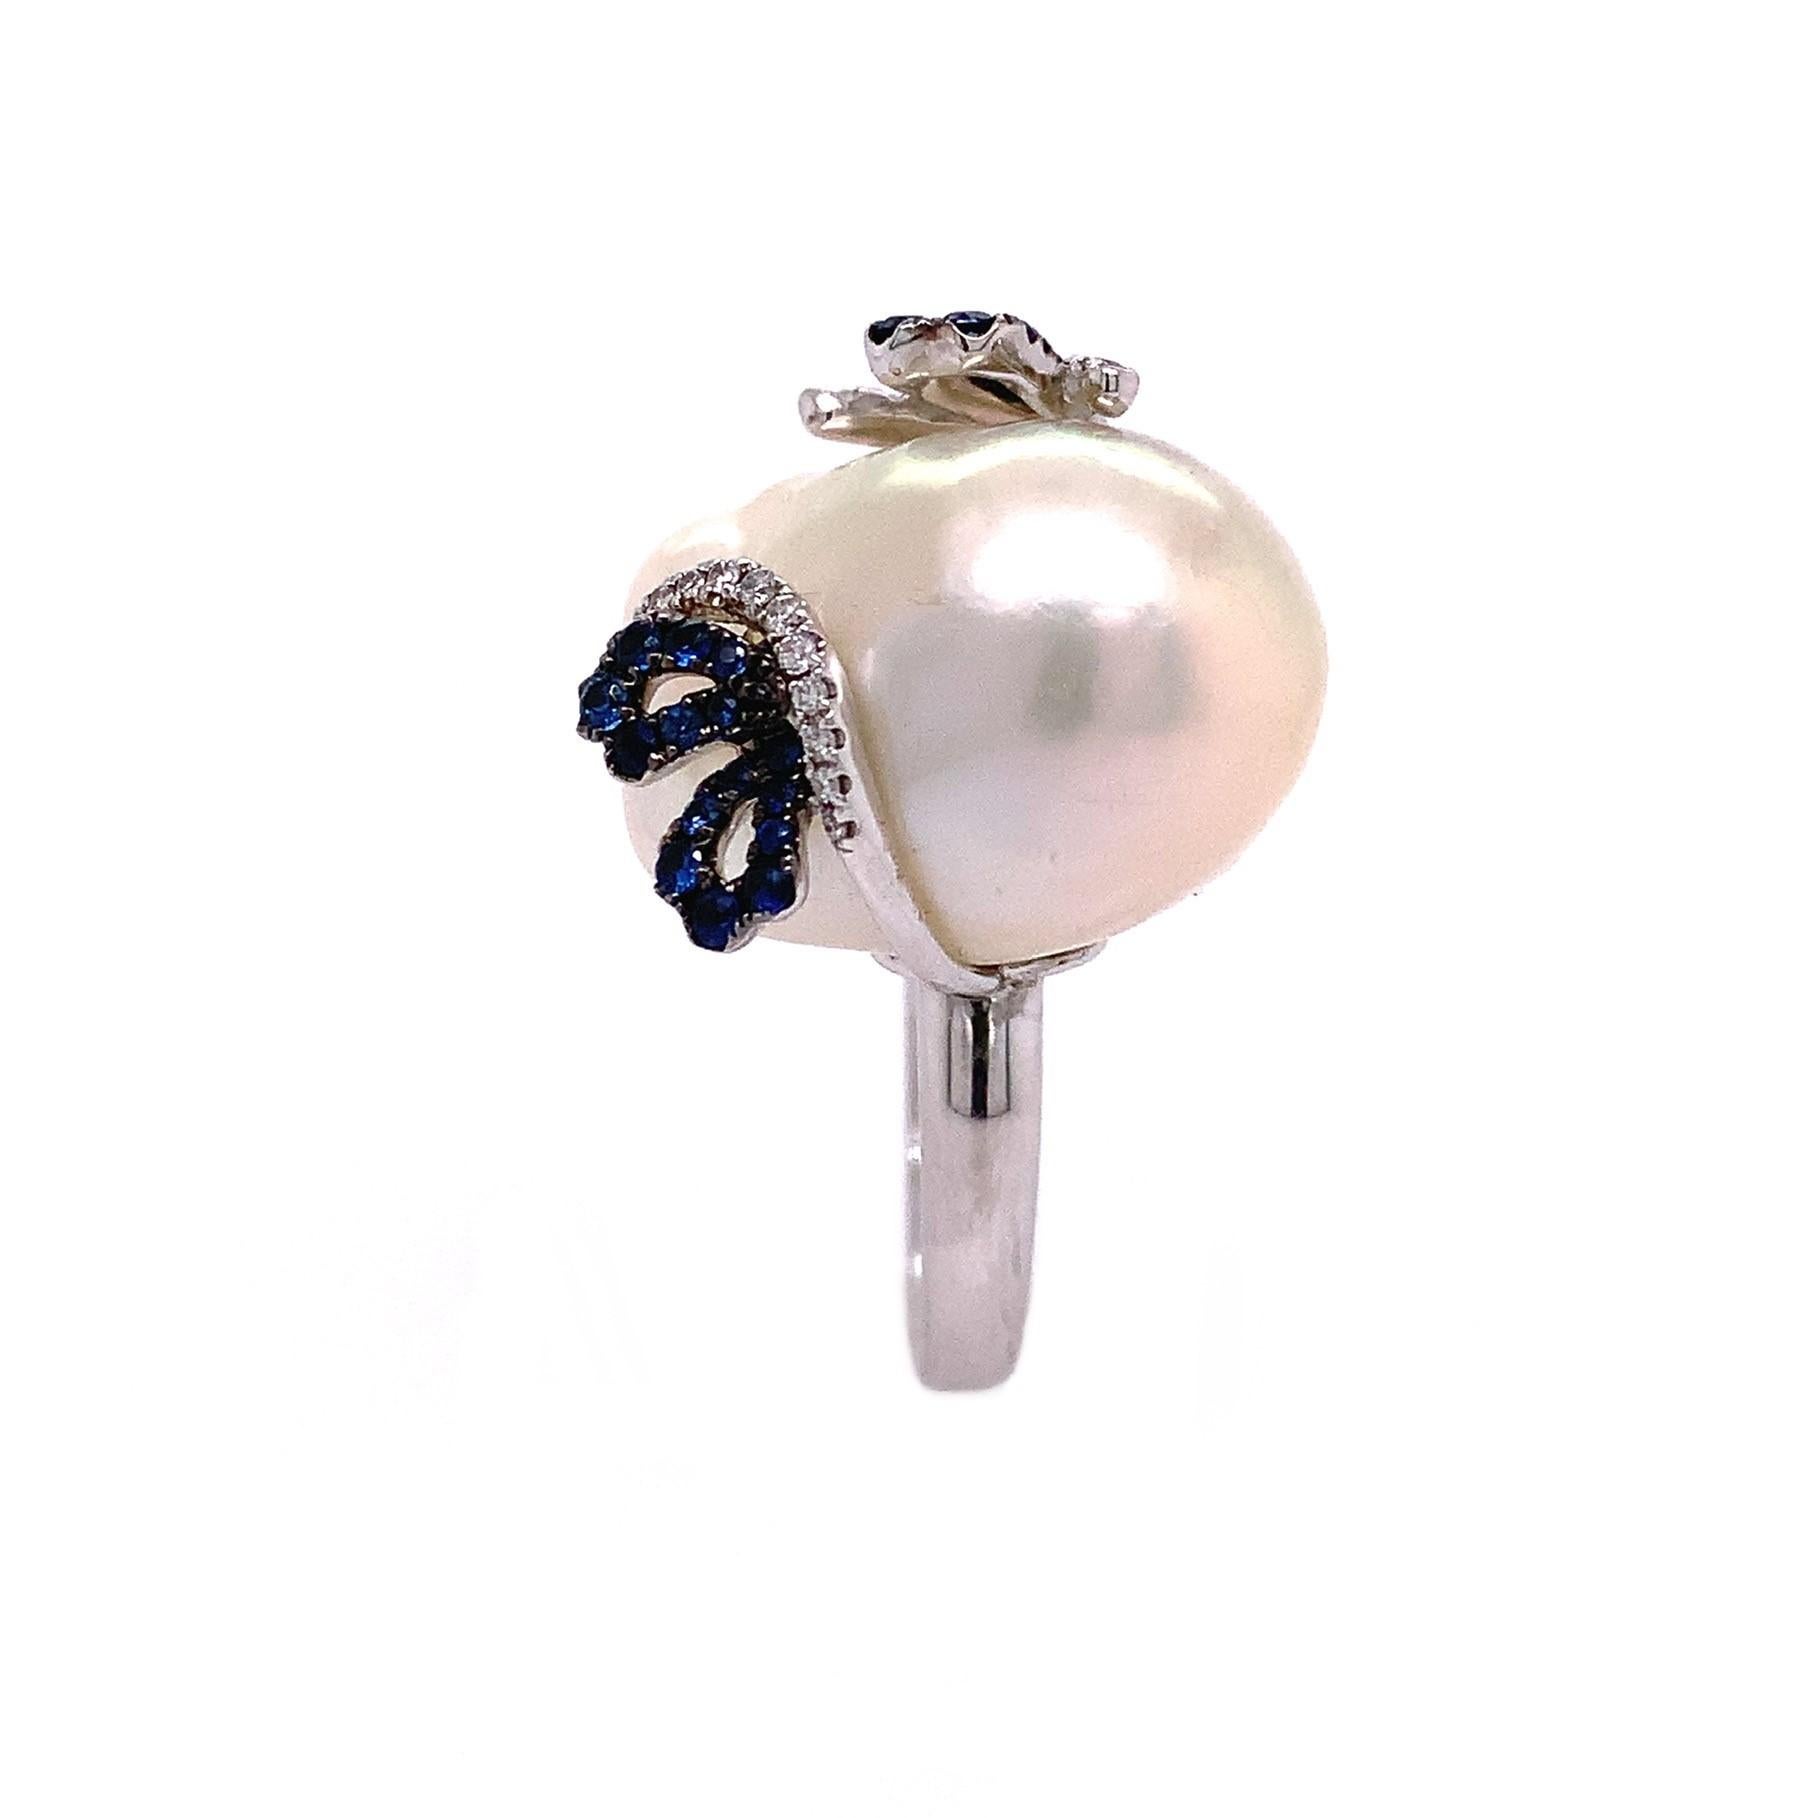 18K White Gold
Pearl: 3.85grm total weight
Blue Sapphire: 0.39ct total weight 
Diamond: 0.13ct total weight
All diamonds are G-H/SI stones.